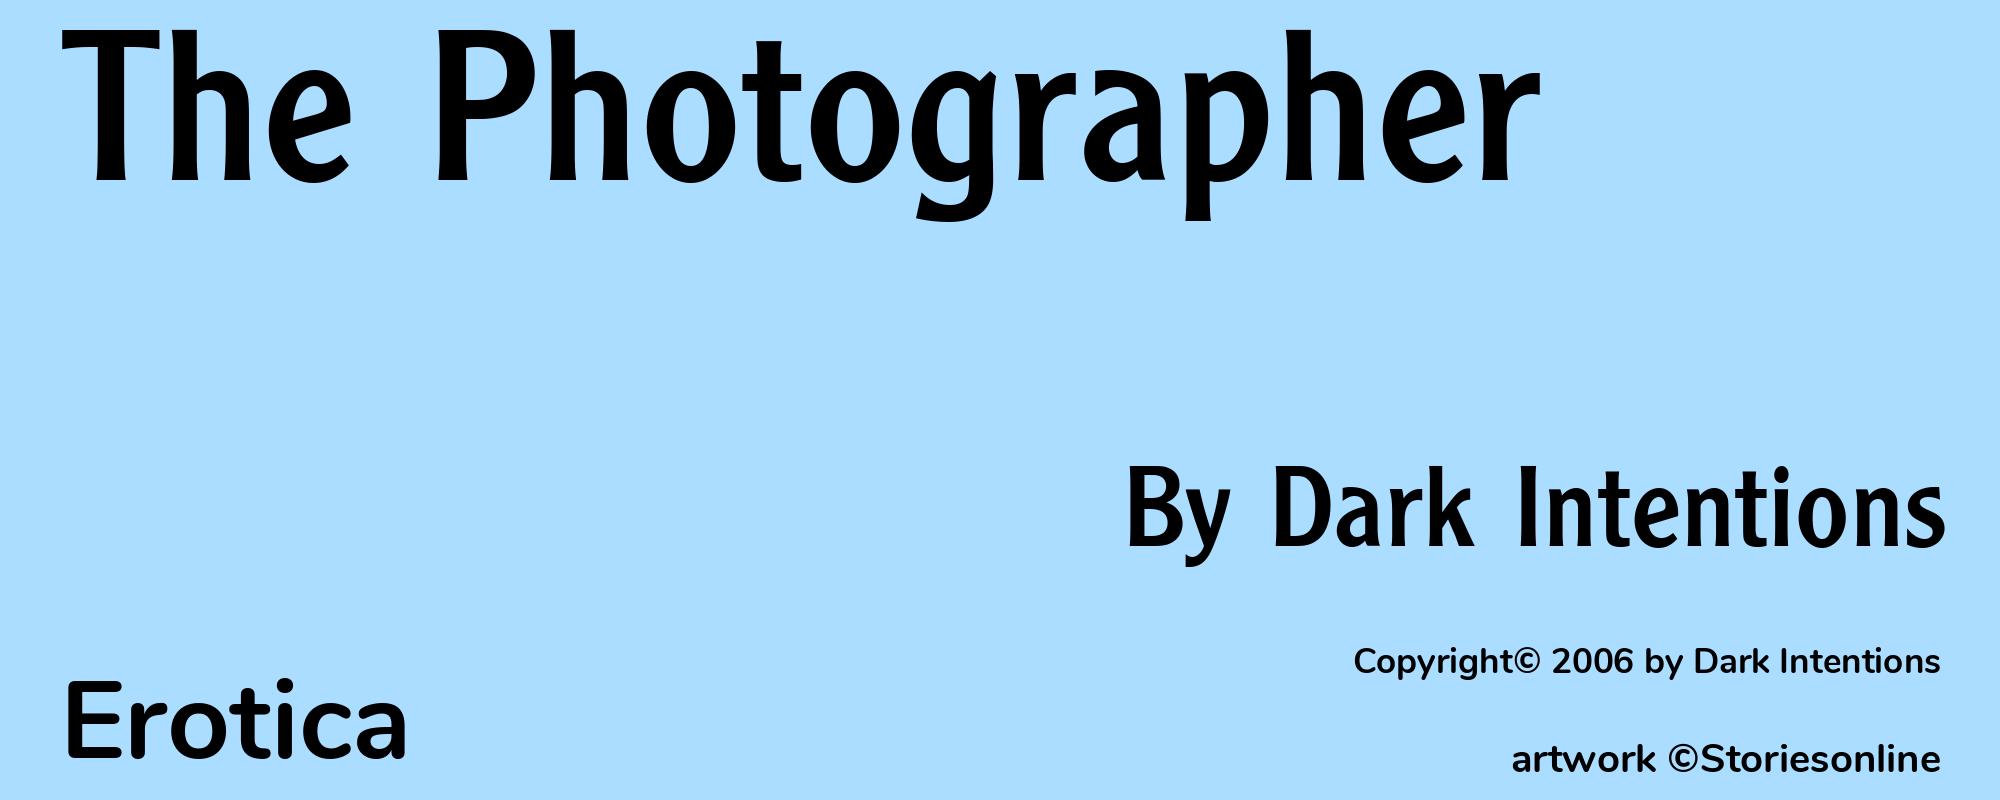 The Photographer - Cover